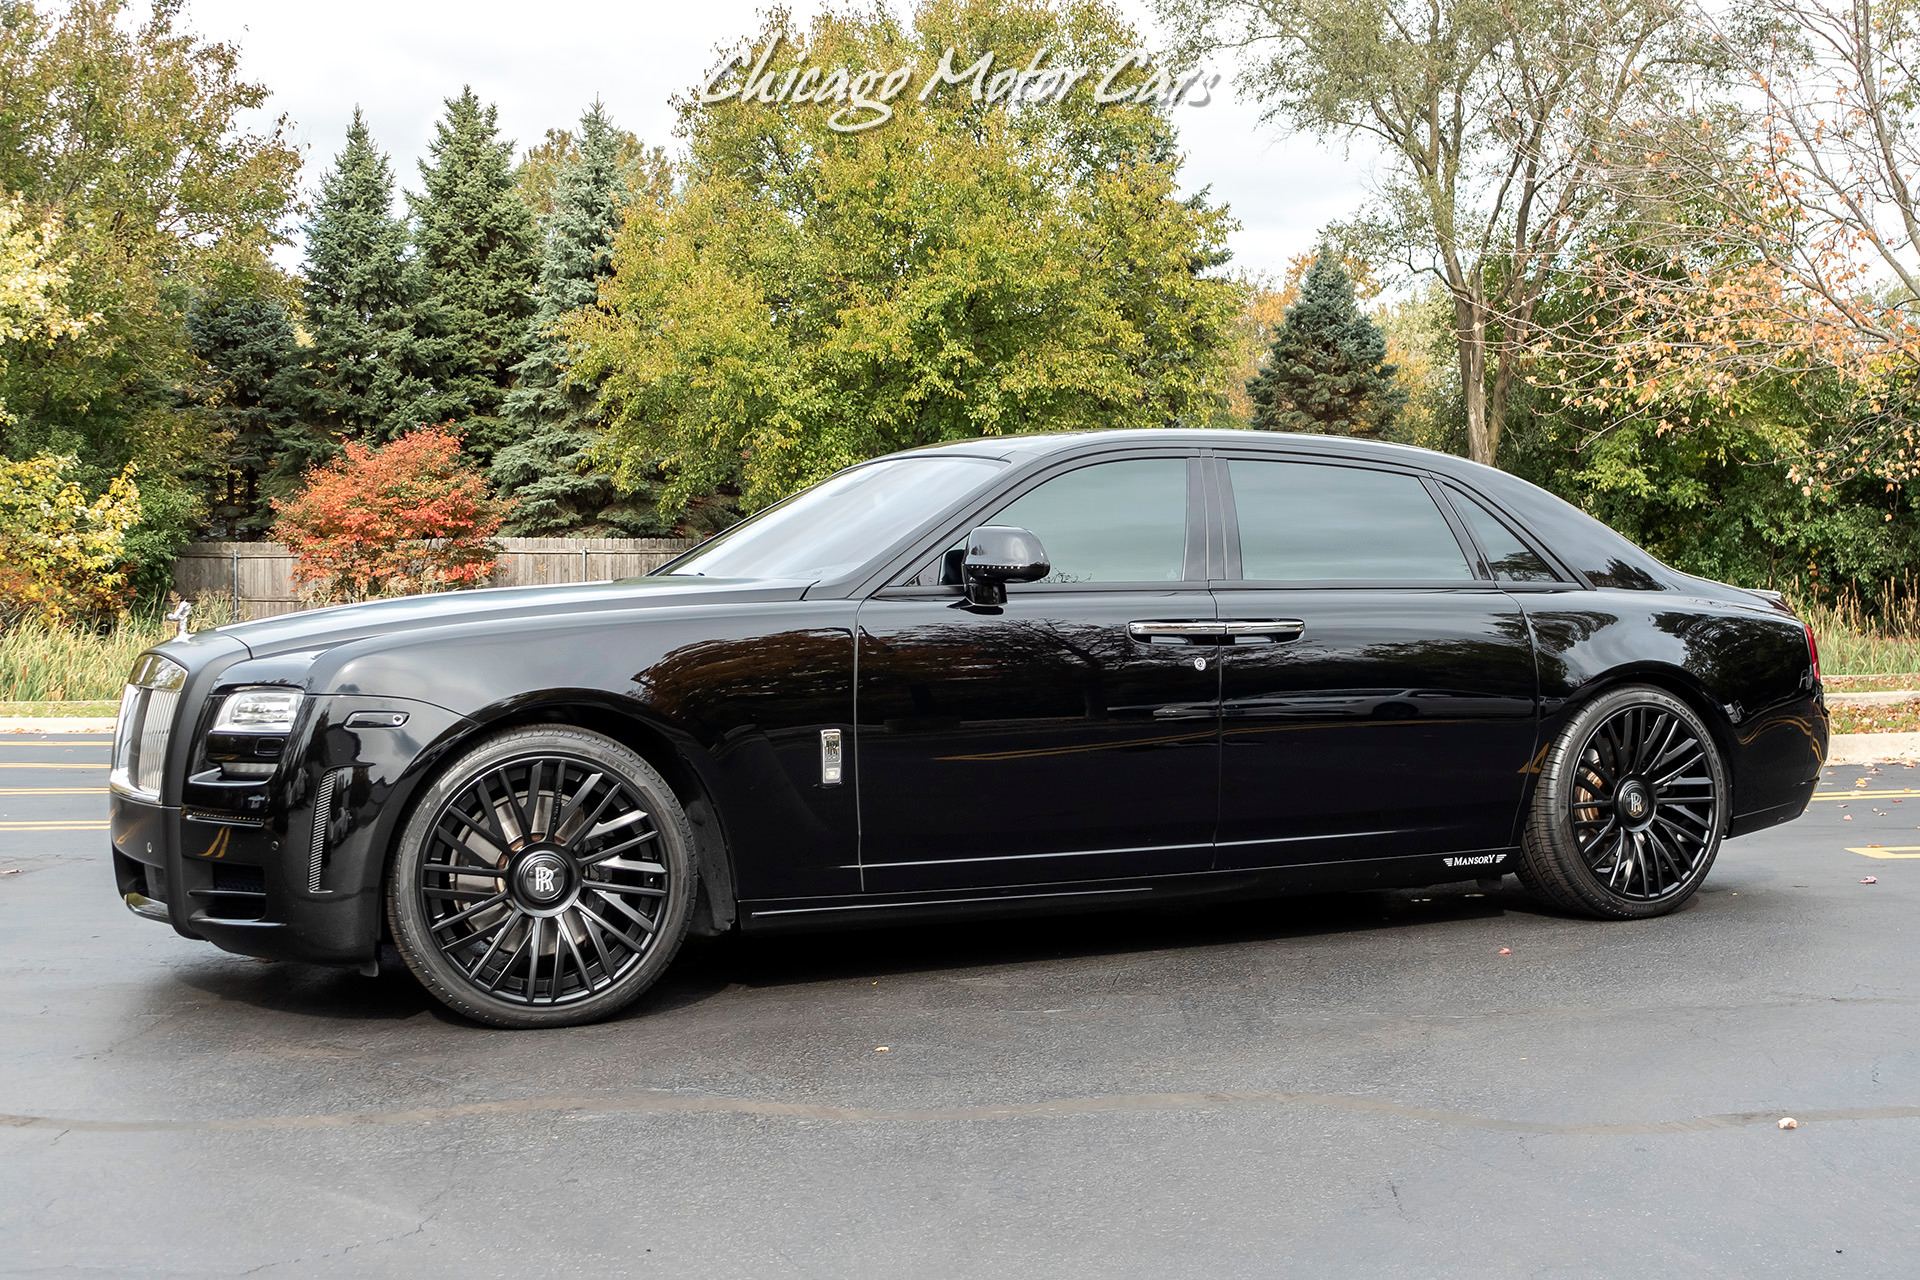 Used 2013 Rolls-Royce Ghost EWB MANSORY Original MSRP $391k+ $60k+ in  Upgrades! LOW MILES! For Sale (Special Pricing) | Chicago Motor Cars Stock  #16619A